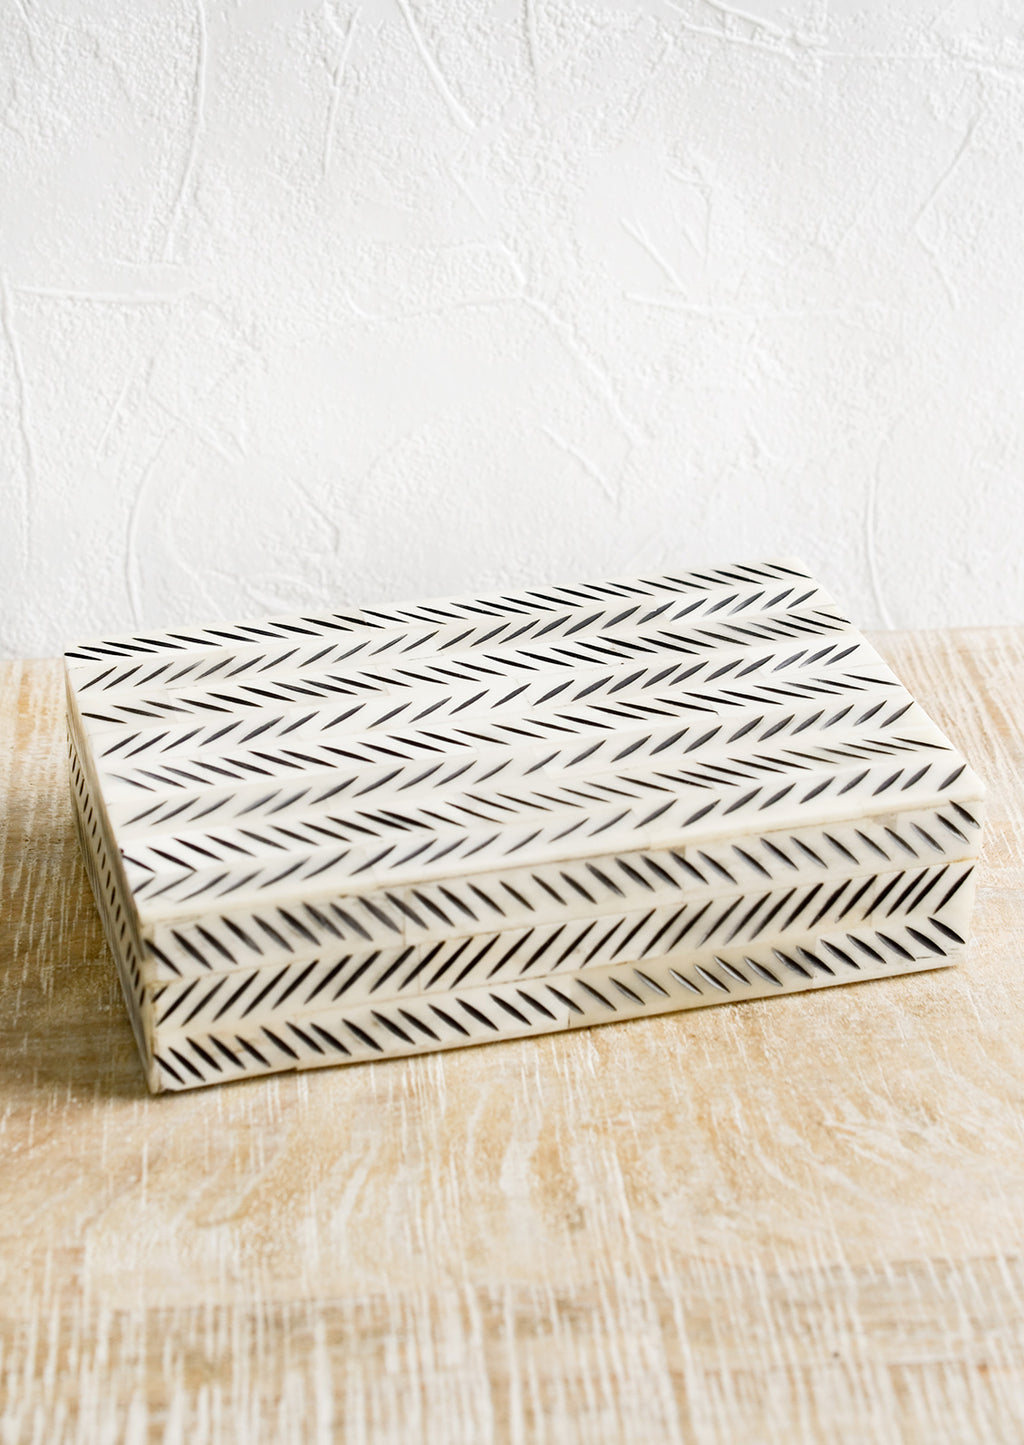 3: A decorative storage box made from ivory bone with black etched "slash" pattern.